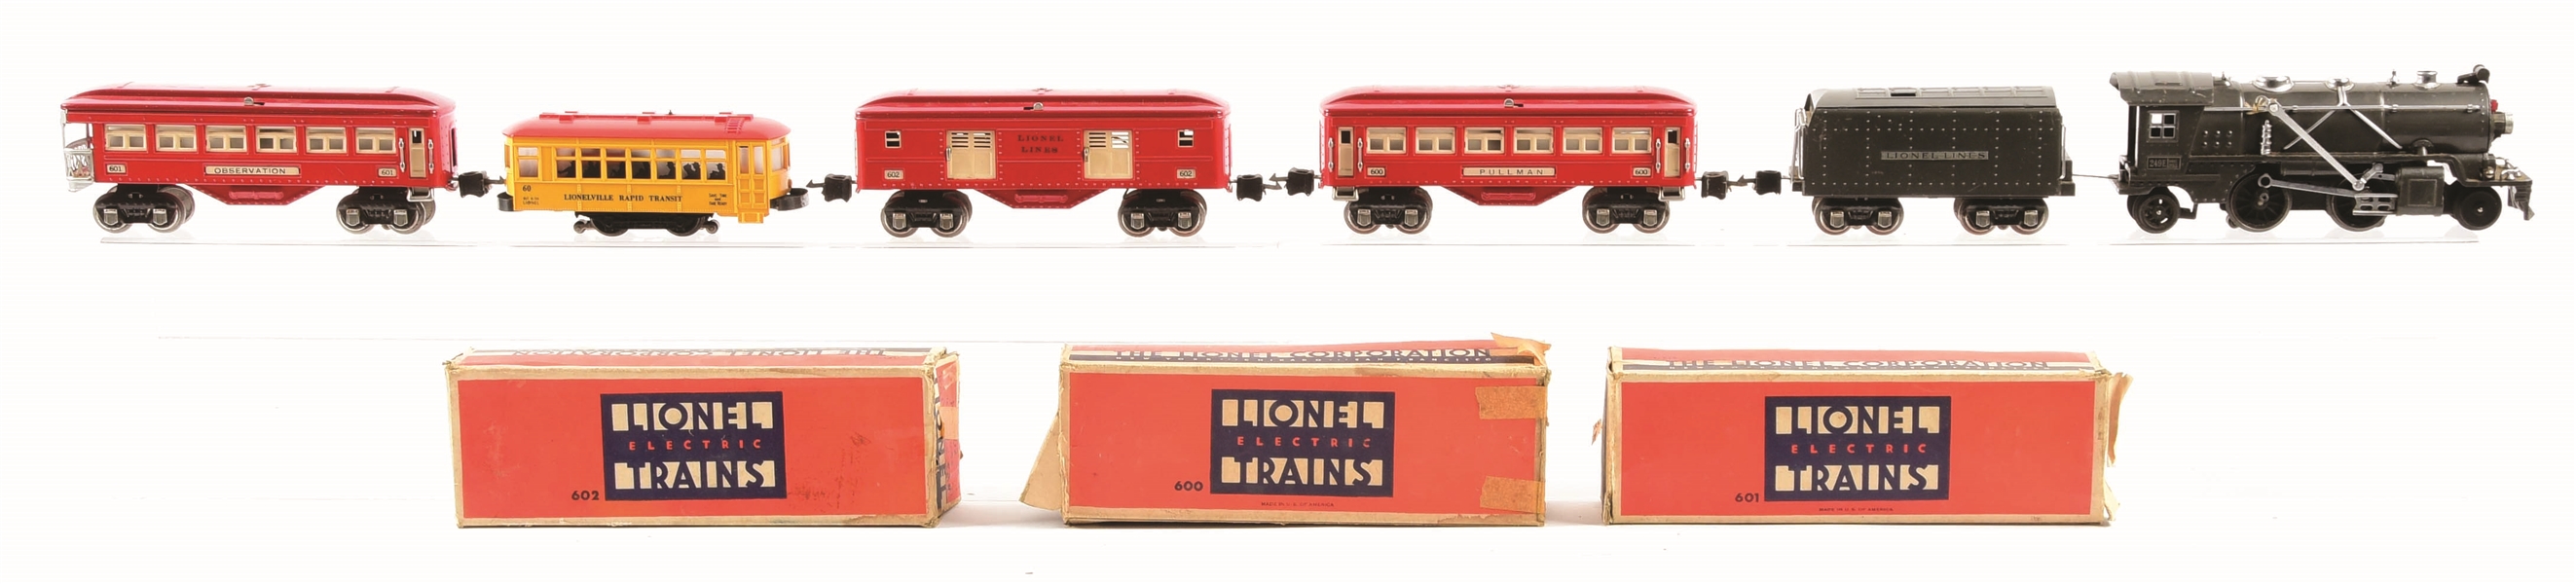 LIONEL TRAIN SET & TROLLEY CAR WITH 6 BOXES.